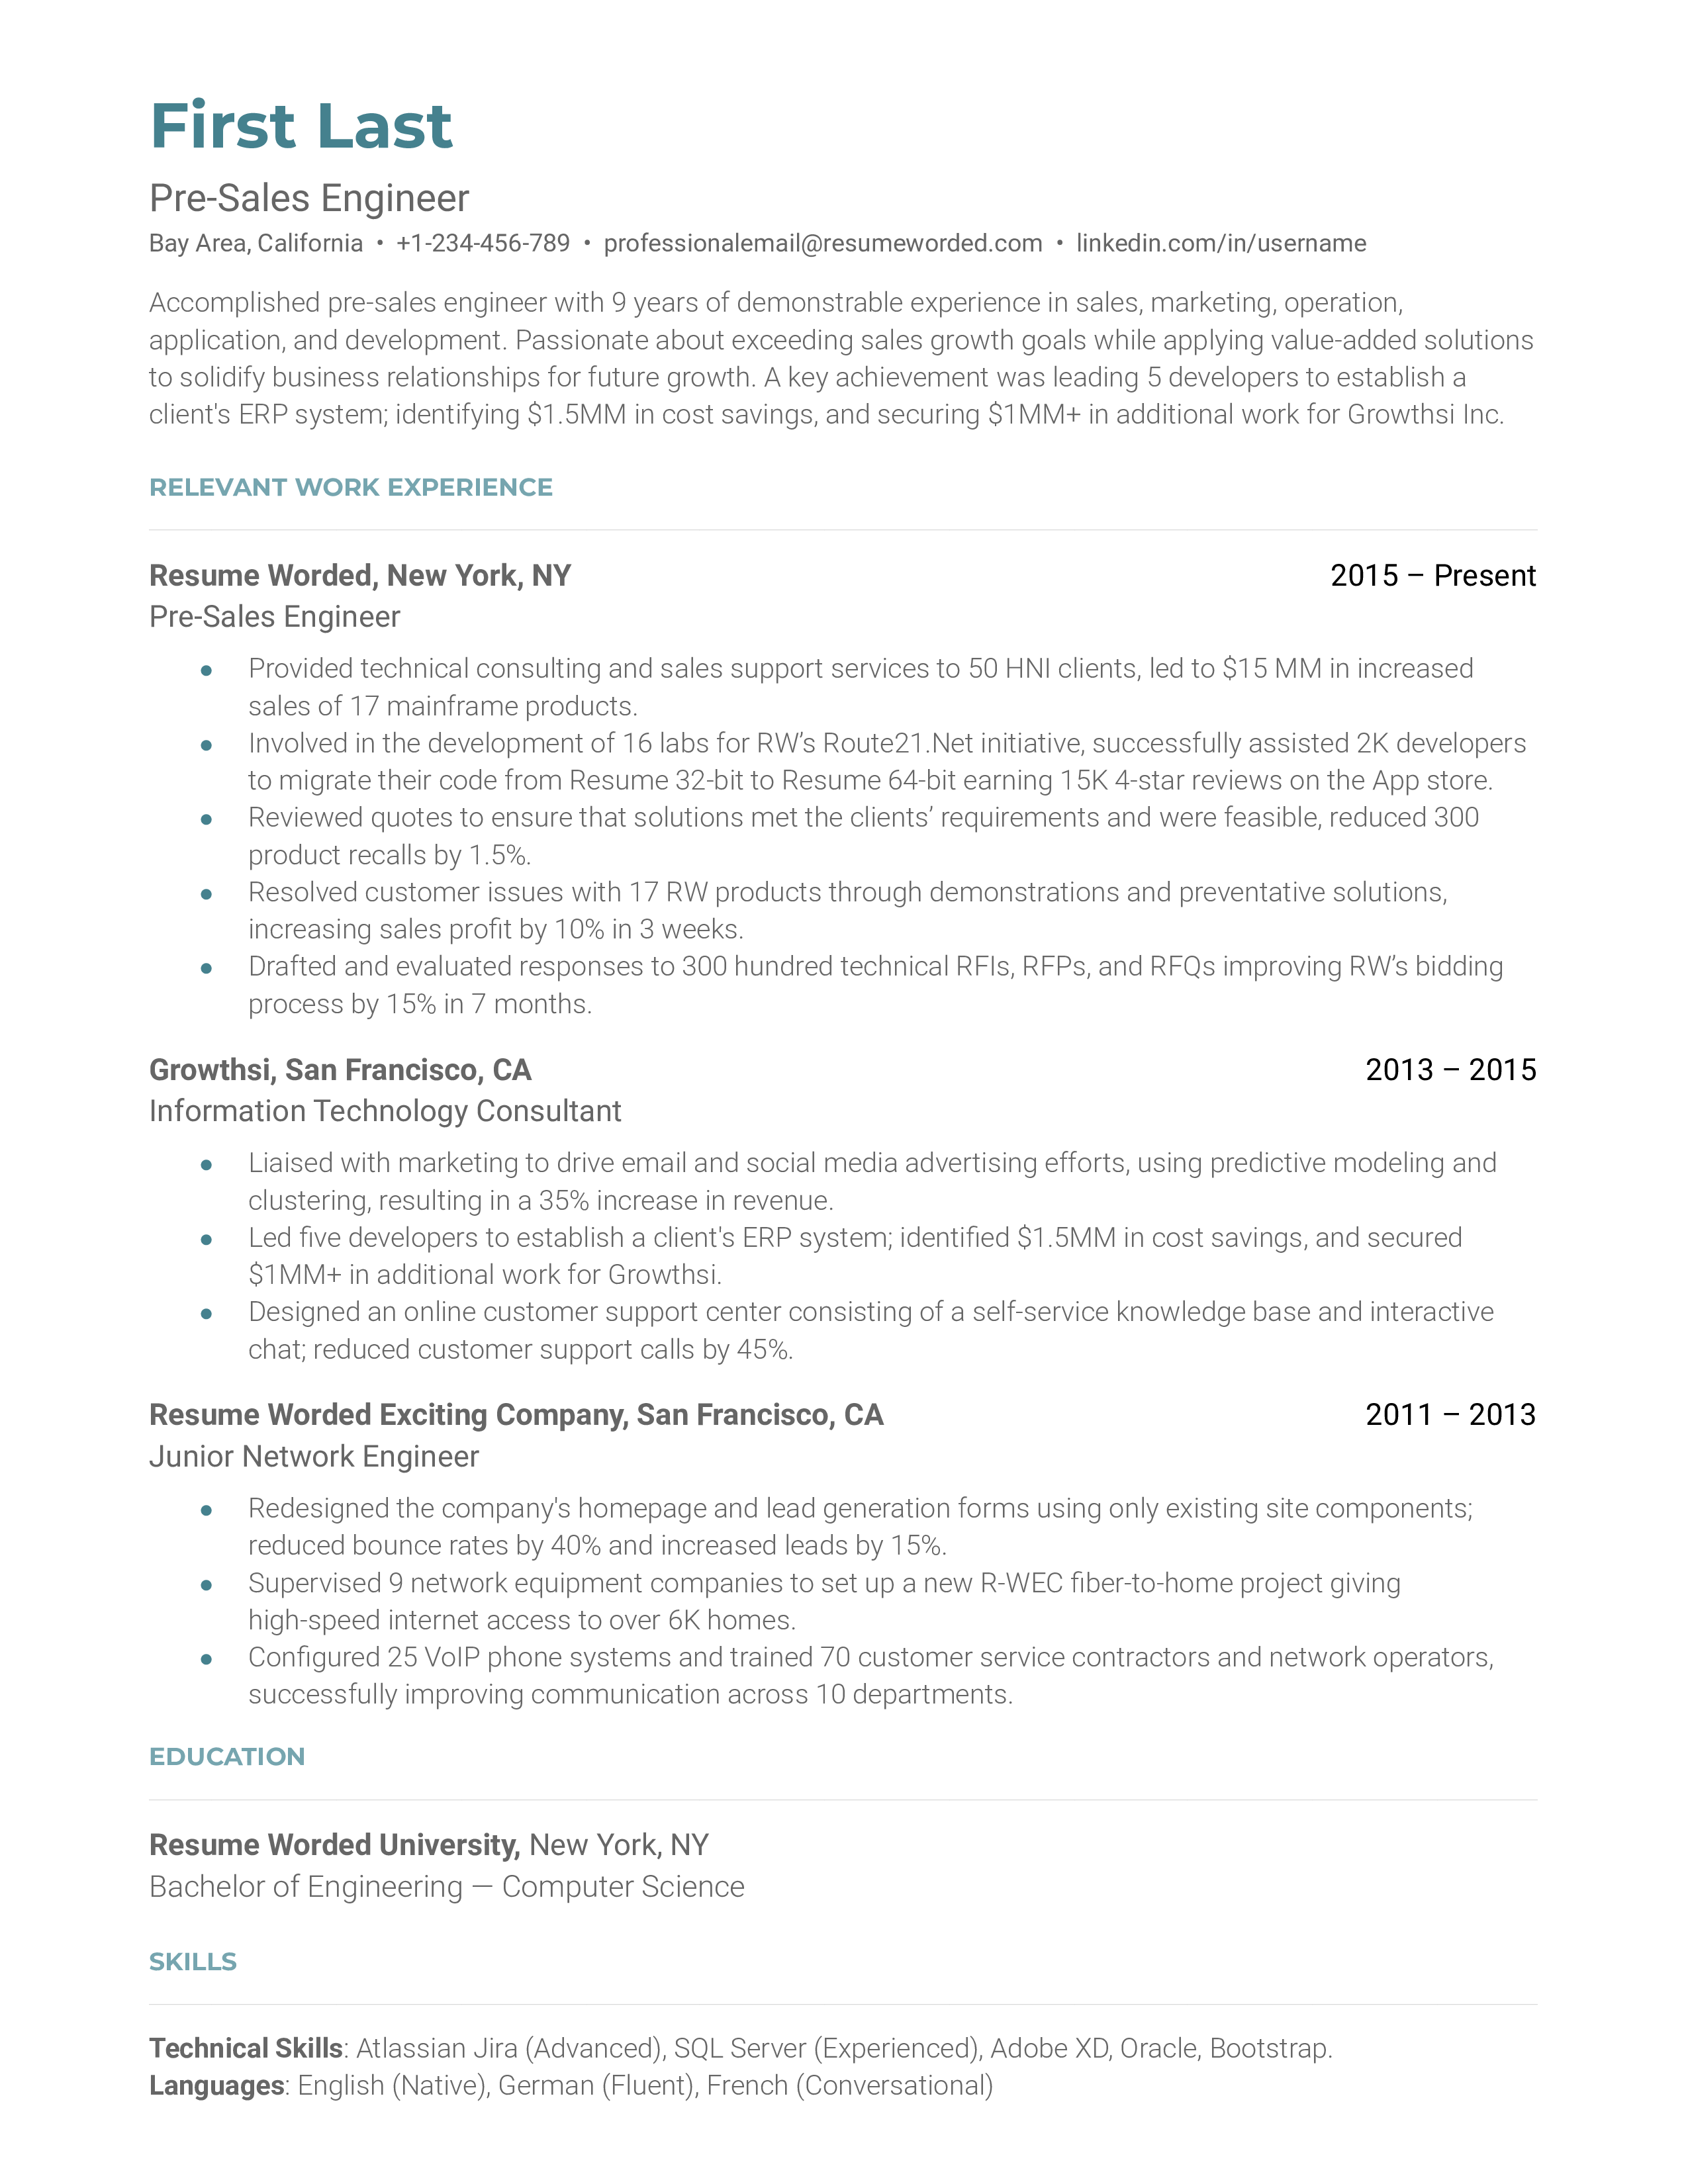 A resume for a pre-sales engineer that highlights their technical role in supporting the sales engineer.